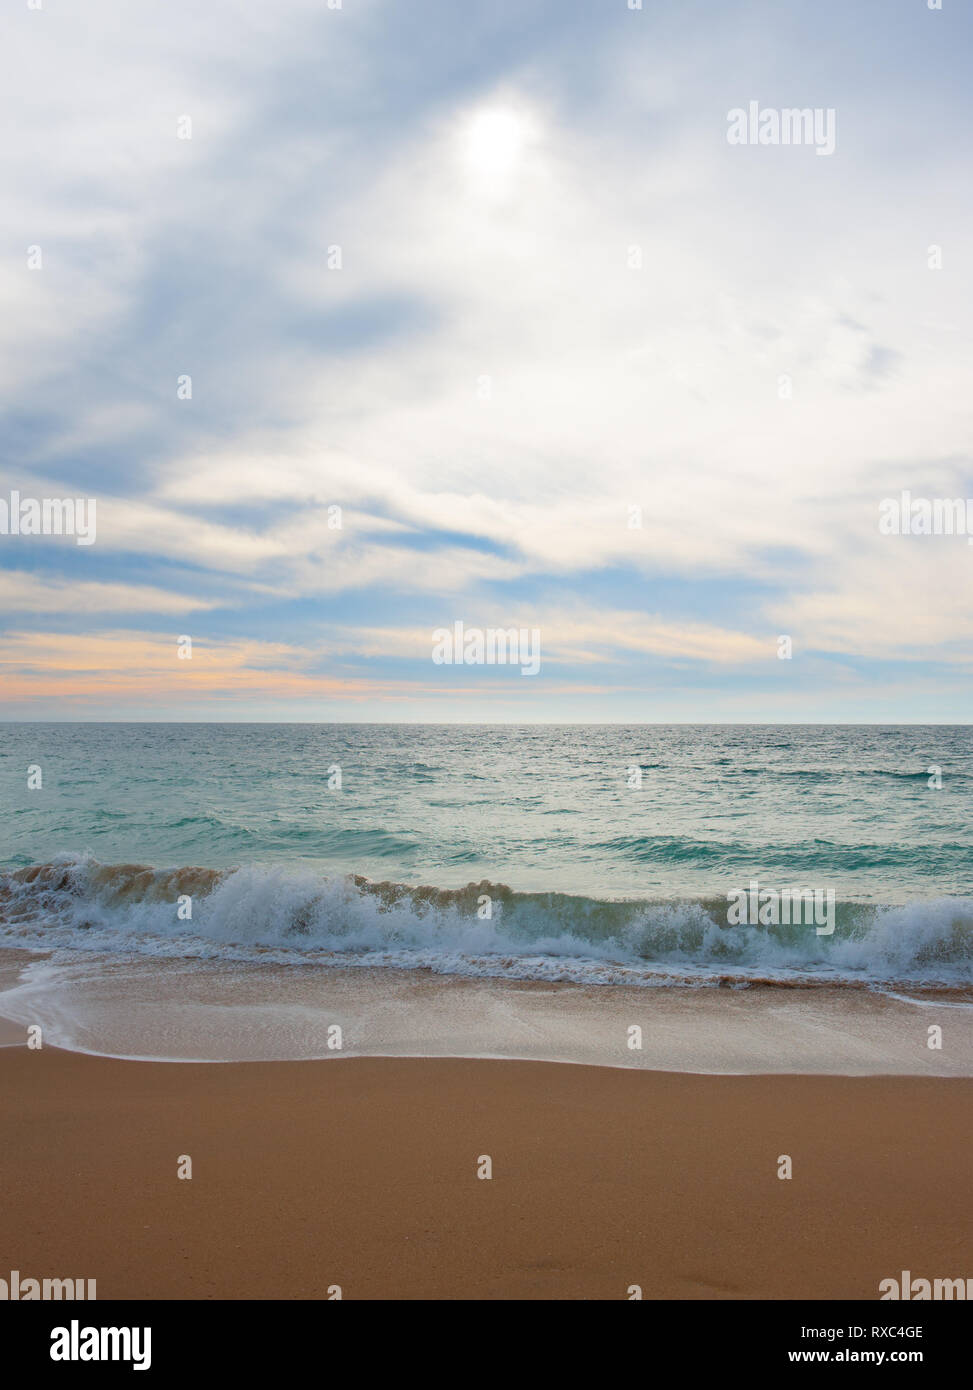 peaceful seascape with waves gently lapping at the shoreline onto the sand.  Watery sunshine filters through light cloud covering the sky Stock Photo